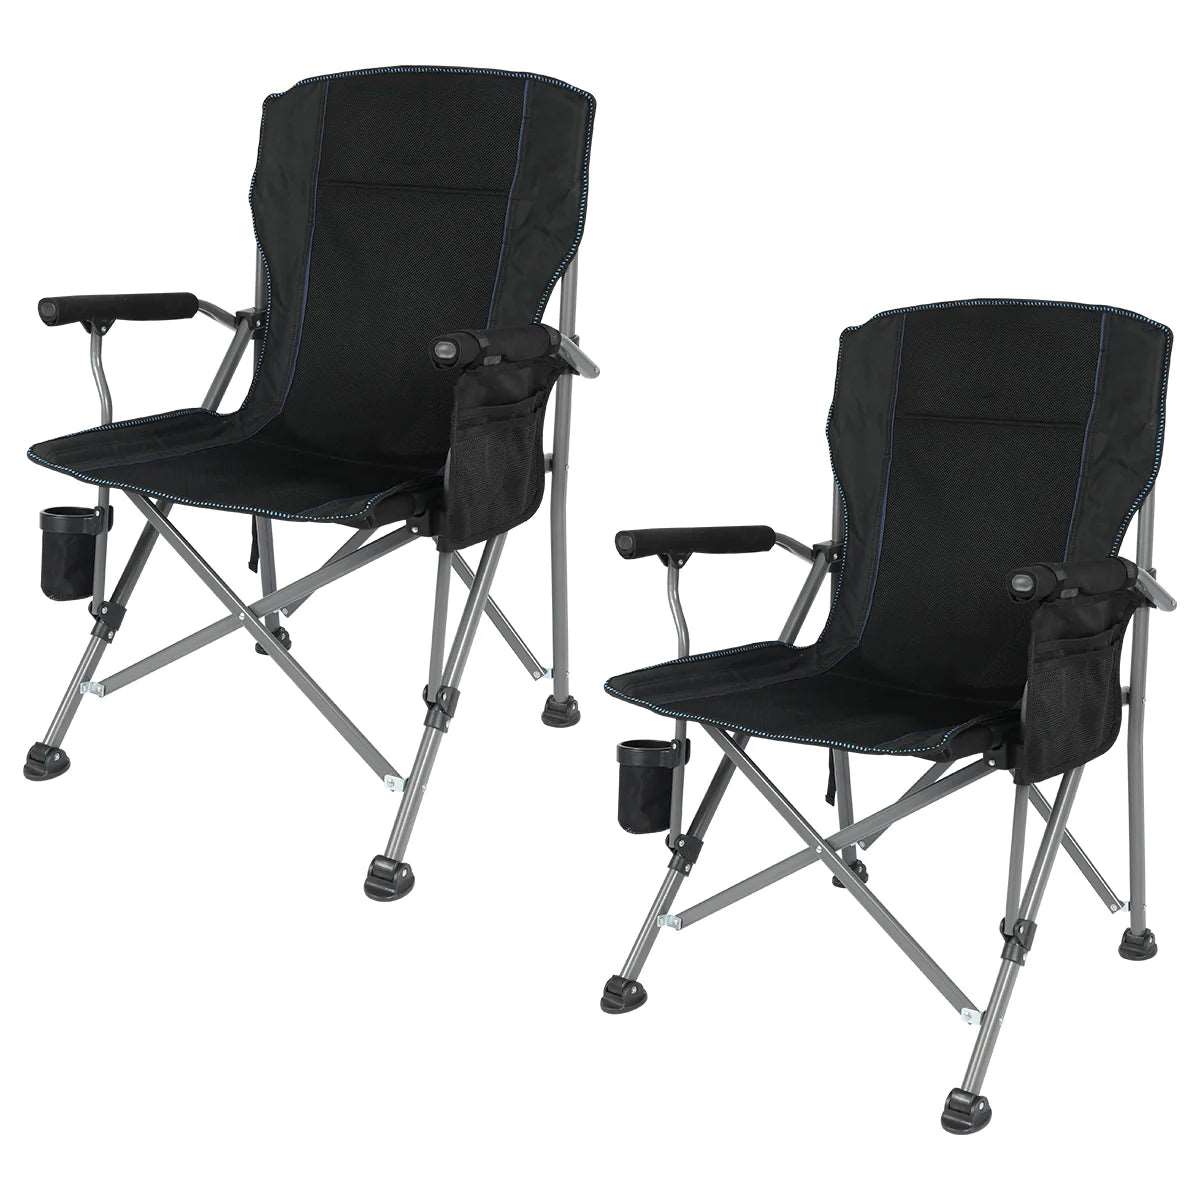 Heavy Duty Folding Camping Chair with High Back & Cup Holder